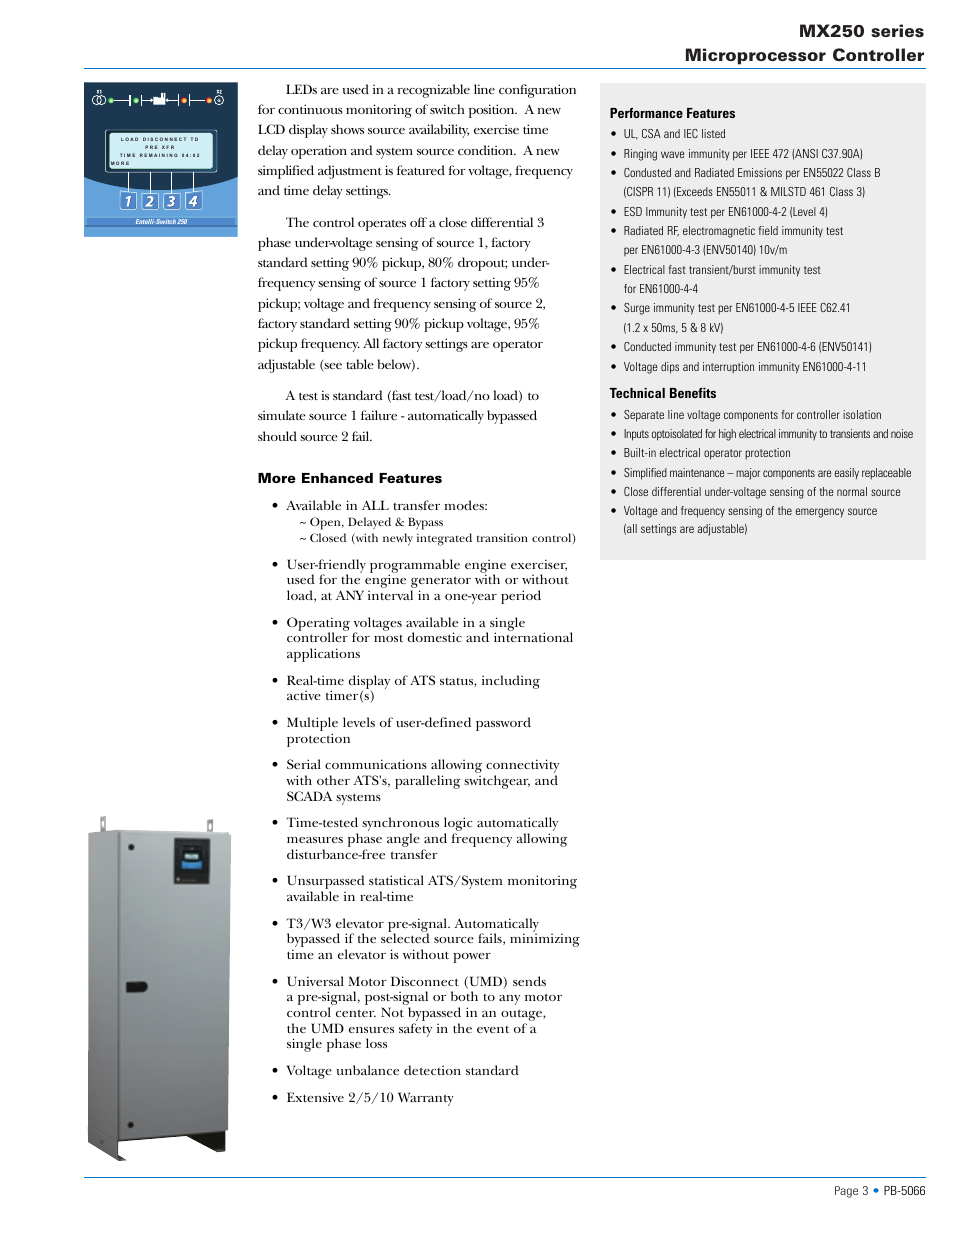 Mx250 series microprocessor controller | GE Zenith ZTS Series User Manual | Page 3 / 10